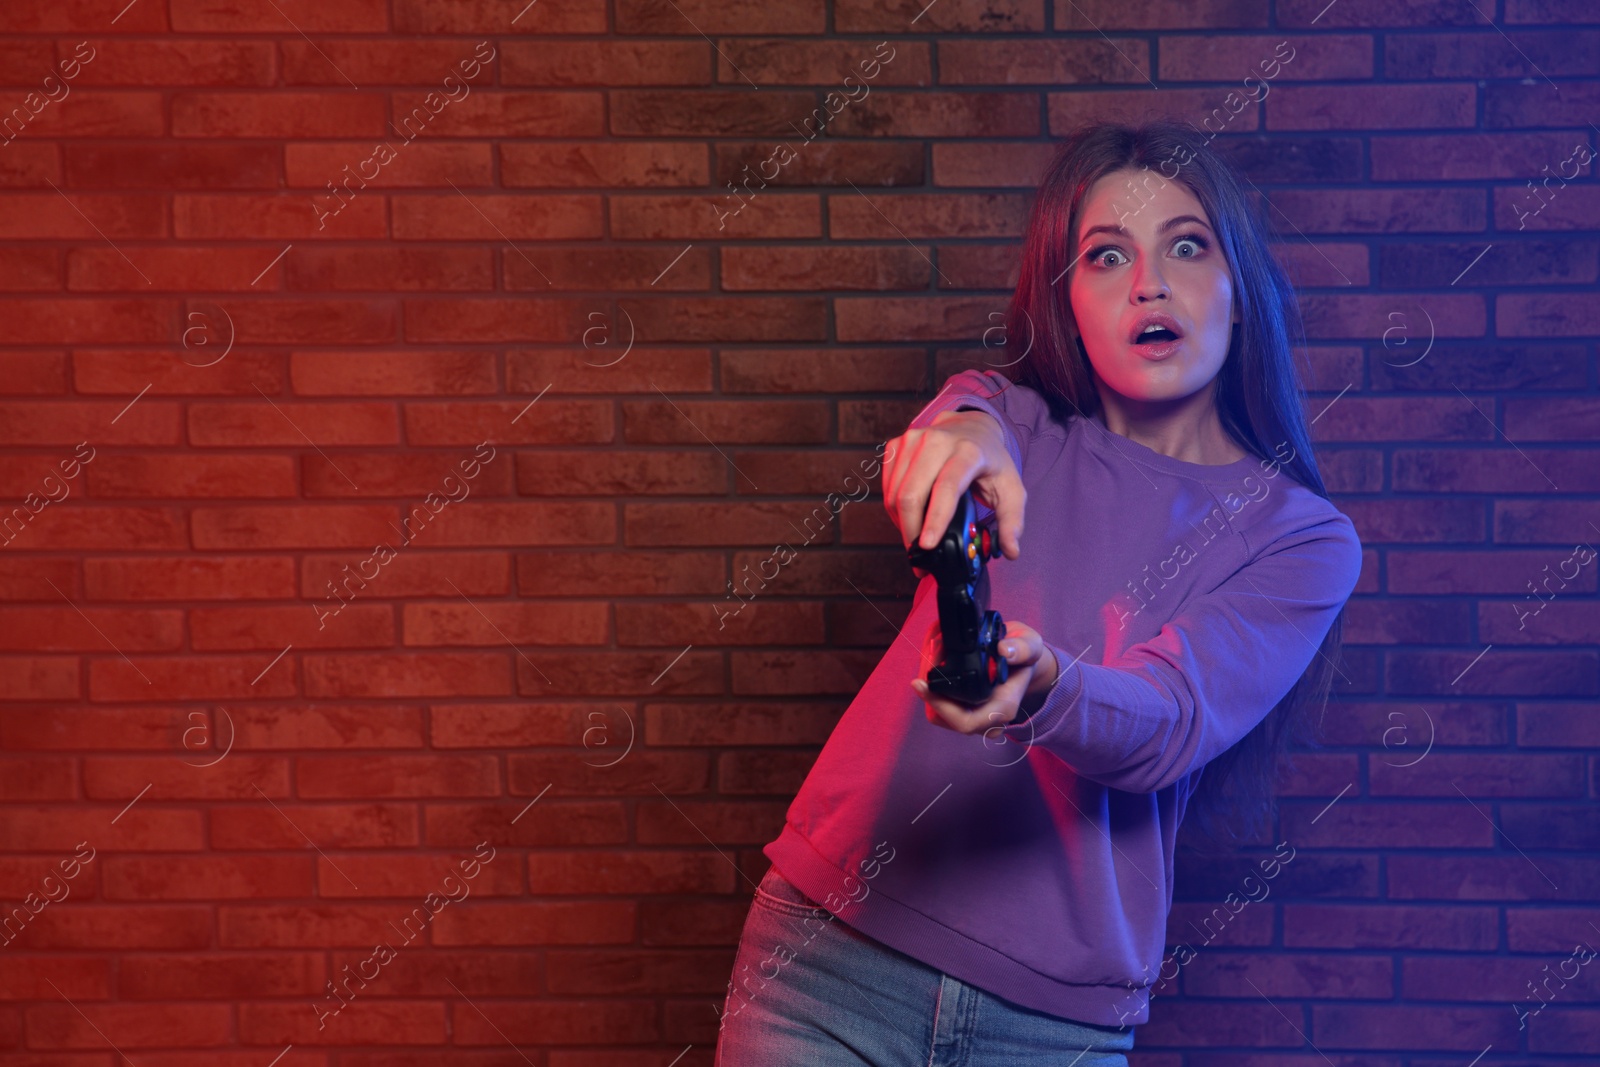 Photo of Emotional young woman playing video games with controller near brick wall. Space for text